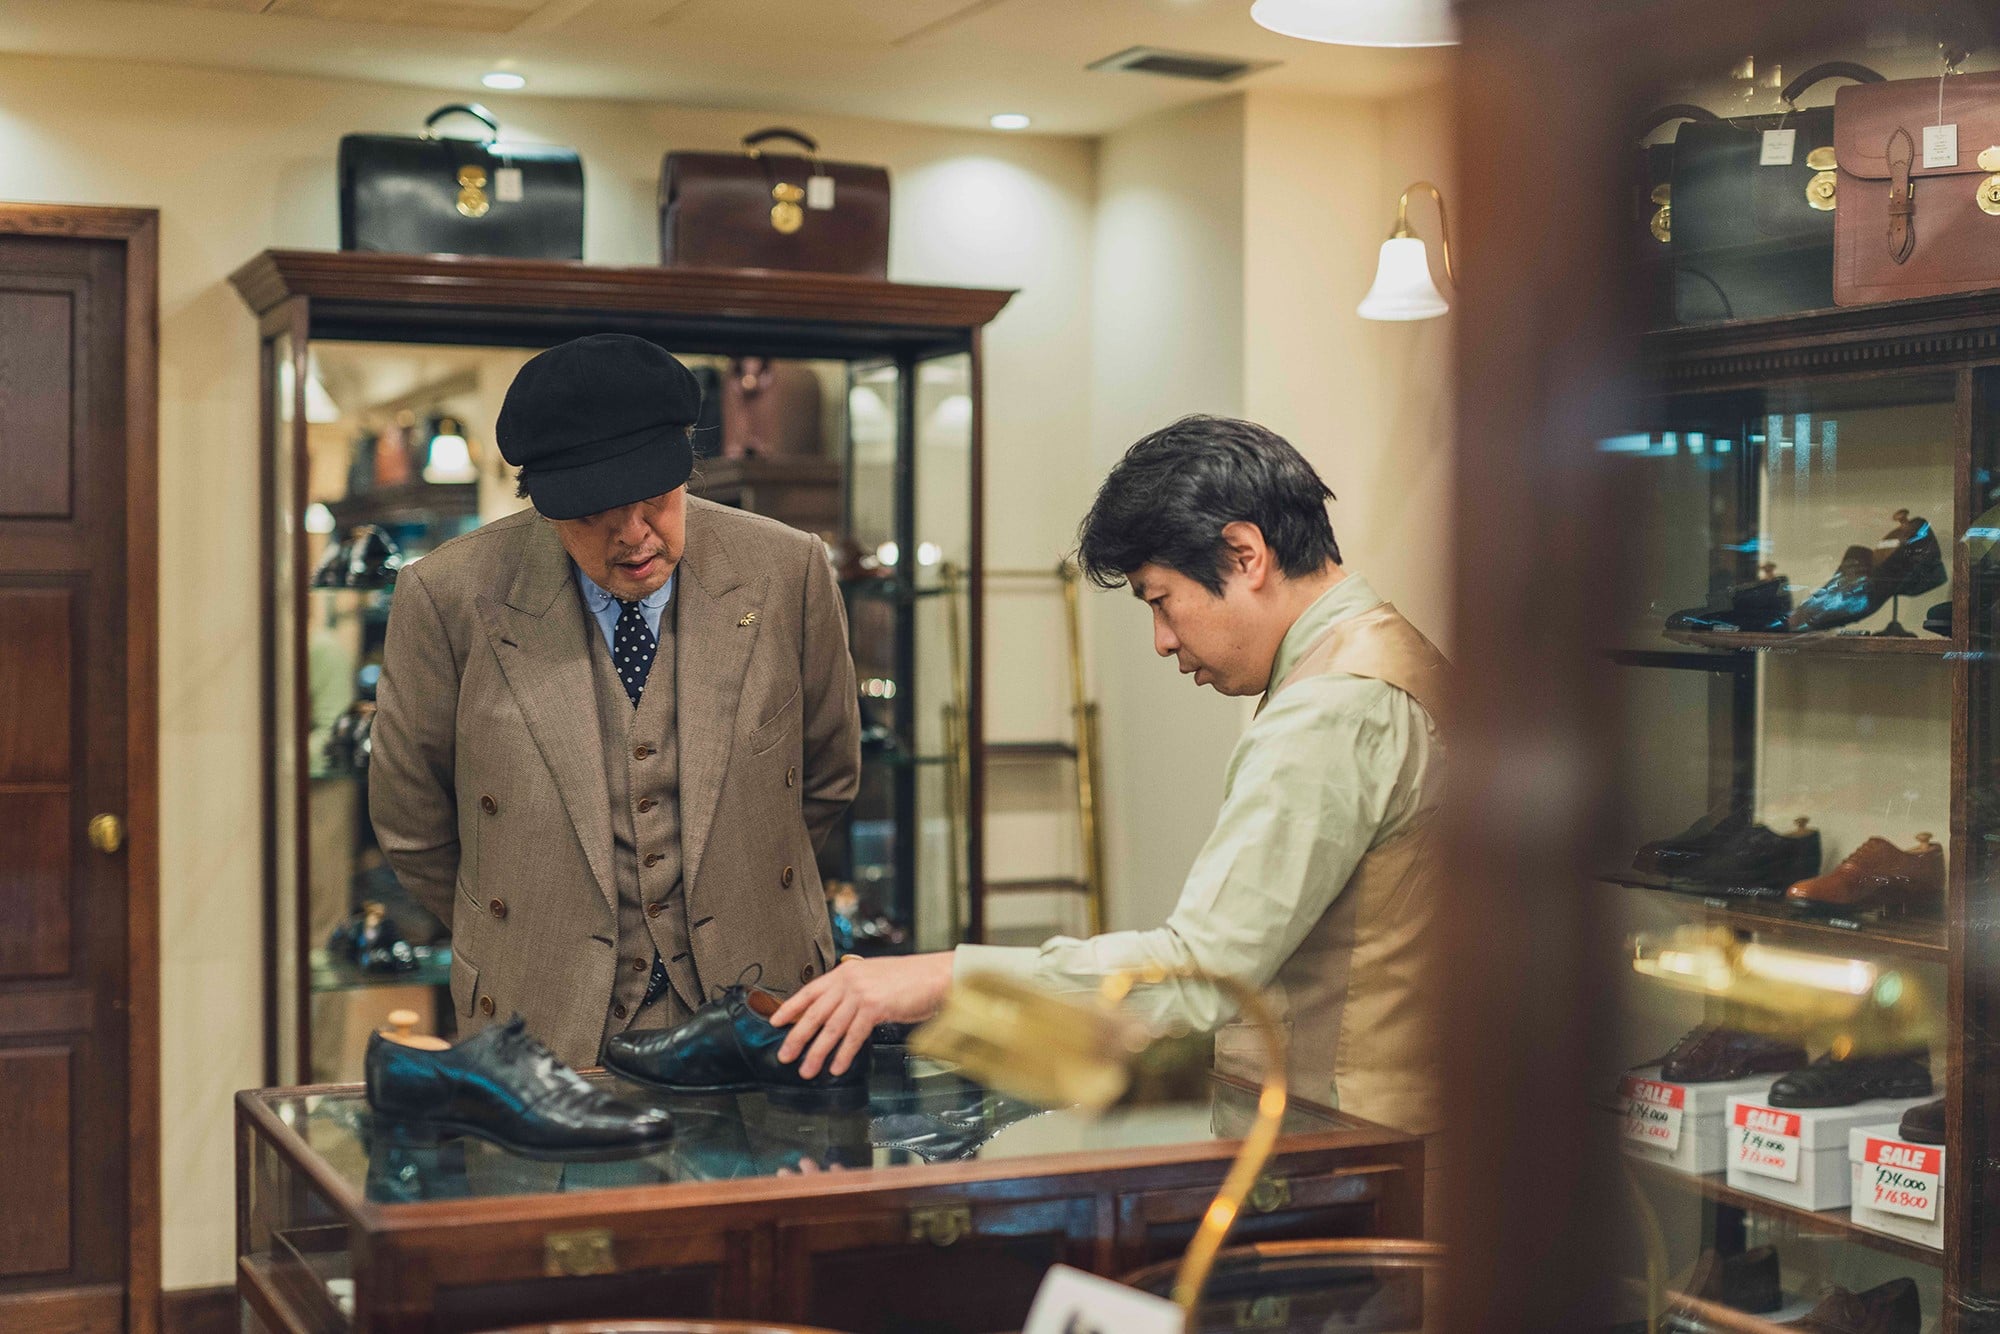  This day, Aoyagi brought with him another shoe model called the “Kingston”. The conversation of the 30 years of manager and customer relationship is about their good old days related to leather shoes.